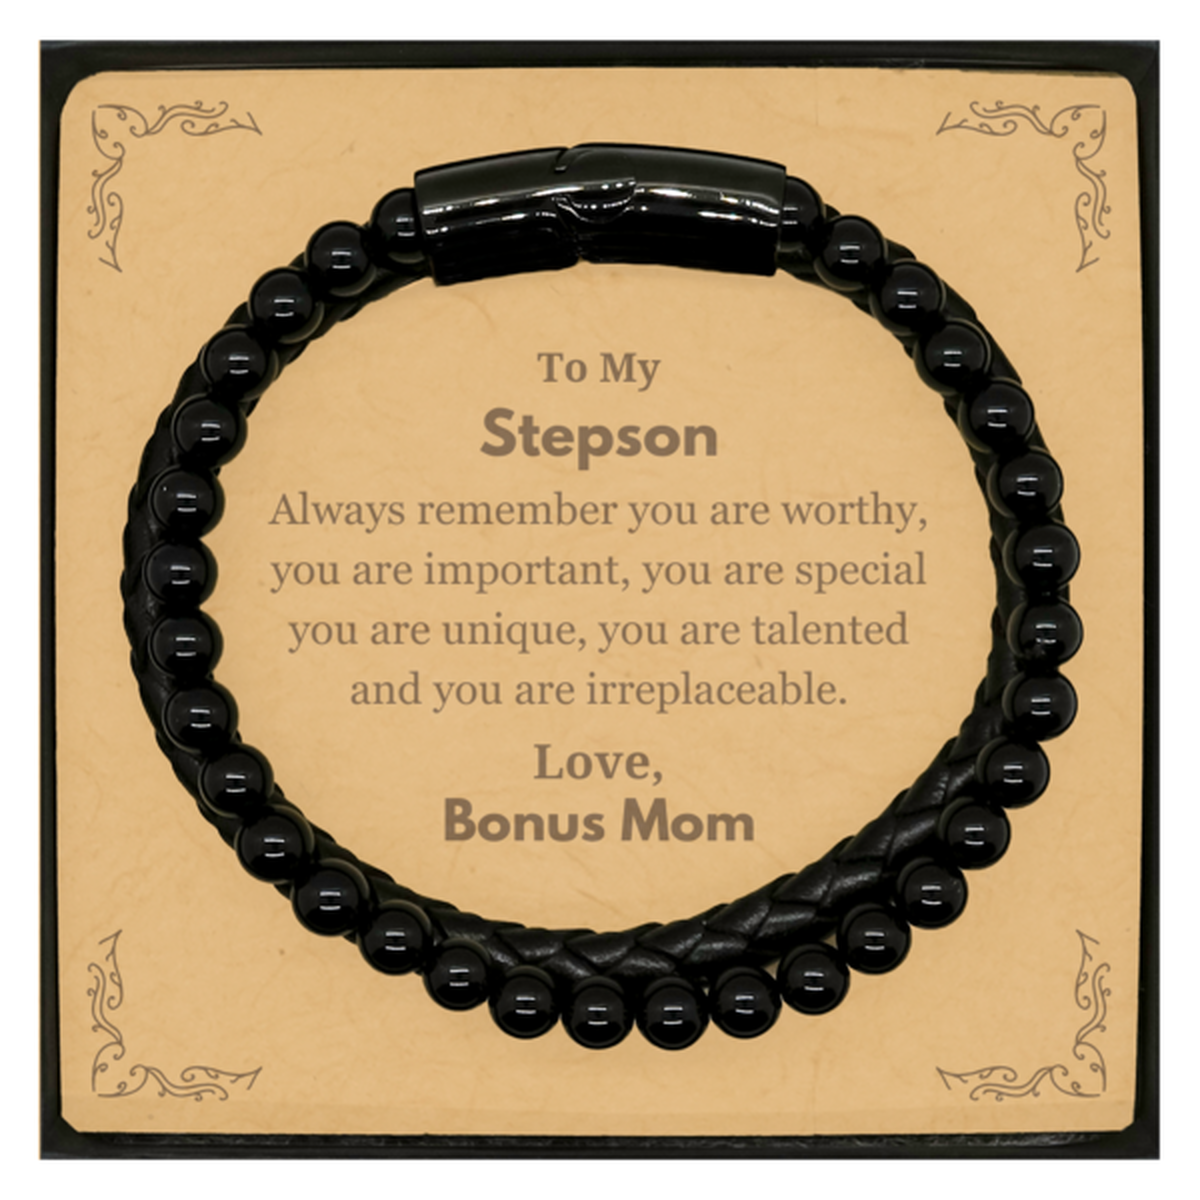 Stepson Birthday Gifts from Bonus Mom, Inspirational Stone Leather Bracelets for Stepson Christmas Graduation Gifts for Stepson Always remember you are worthy, you are important. Love, Bonus Mom